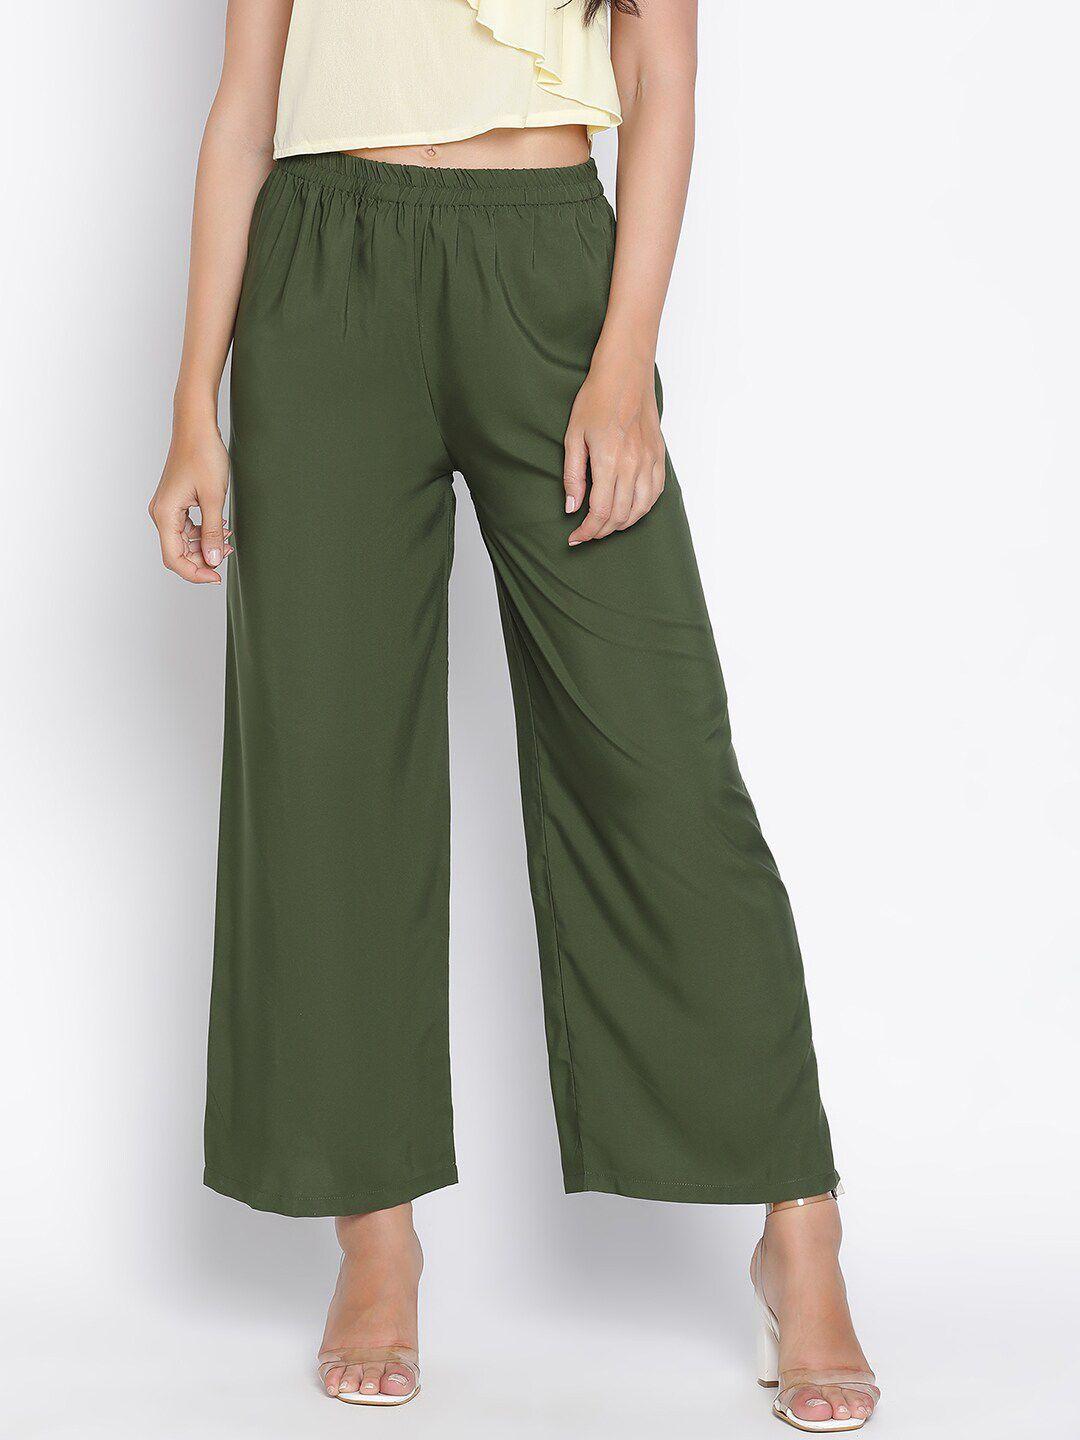 draax-fashions-women-relaxed-flared-trousers